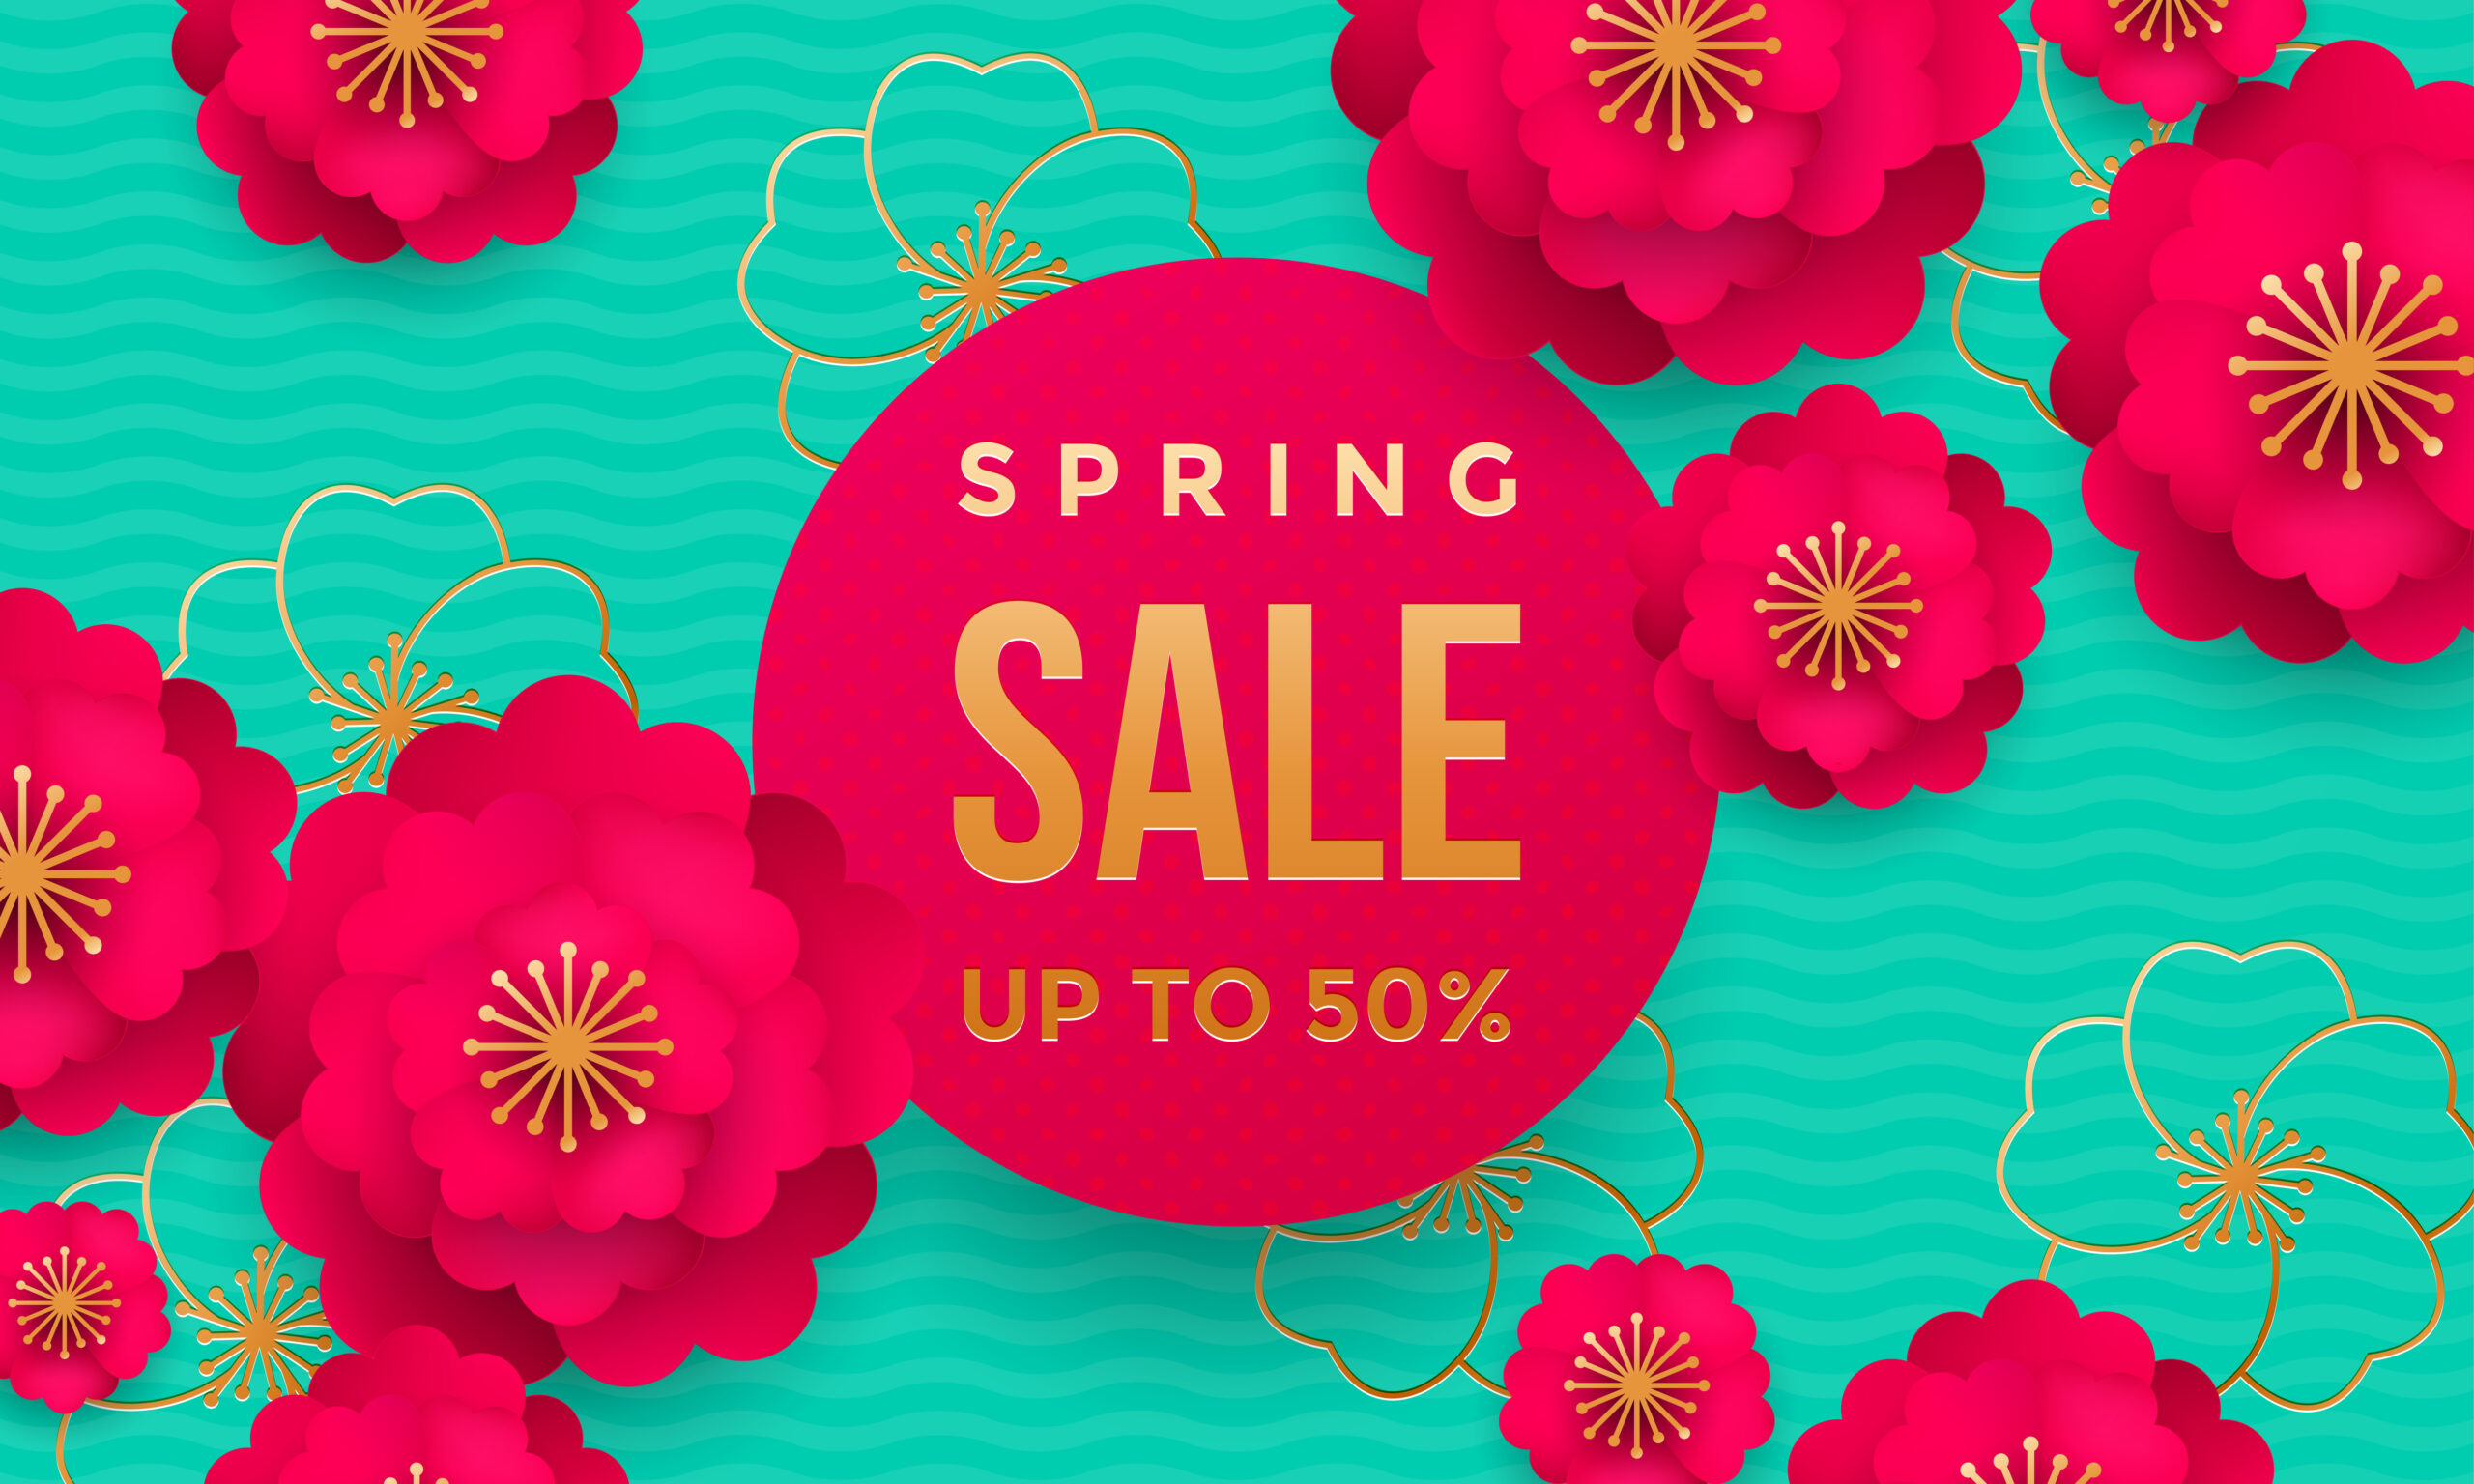 Spring-Sale-Up-to-50%-Red-Flowers-on-Green-Background